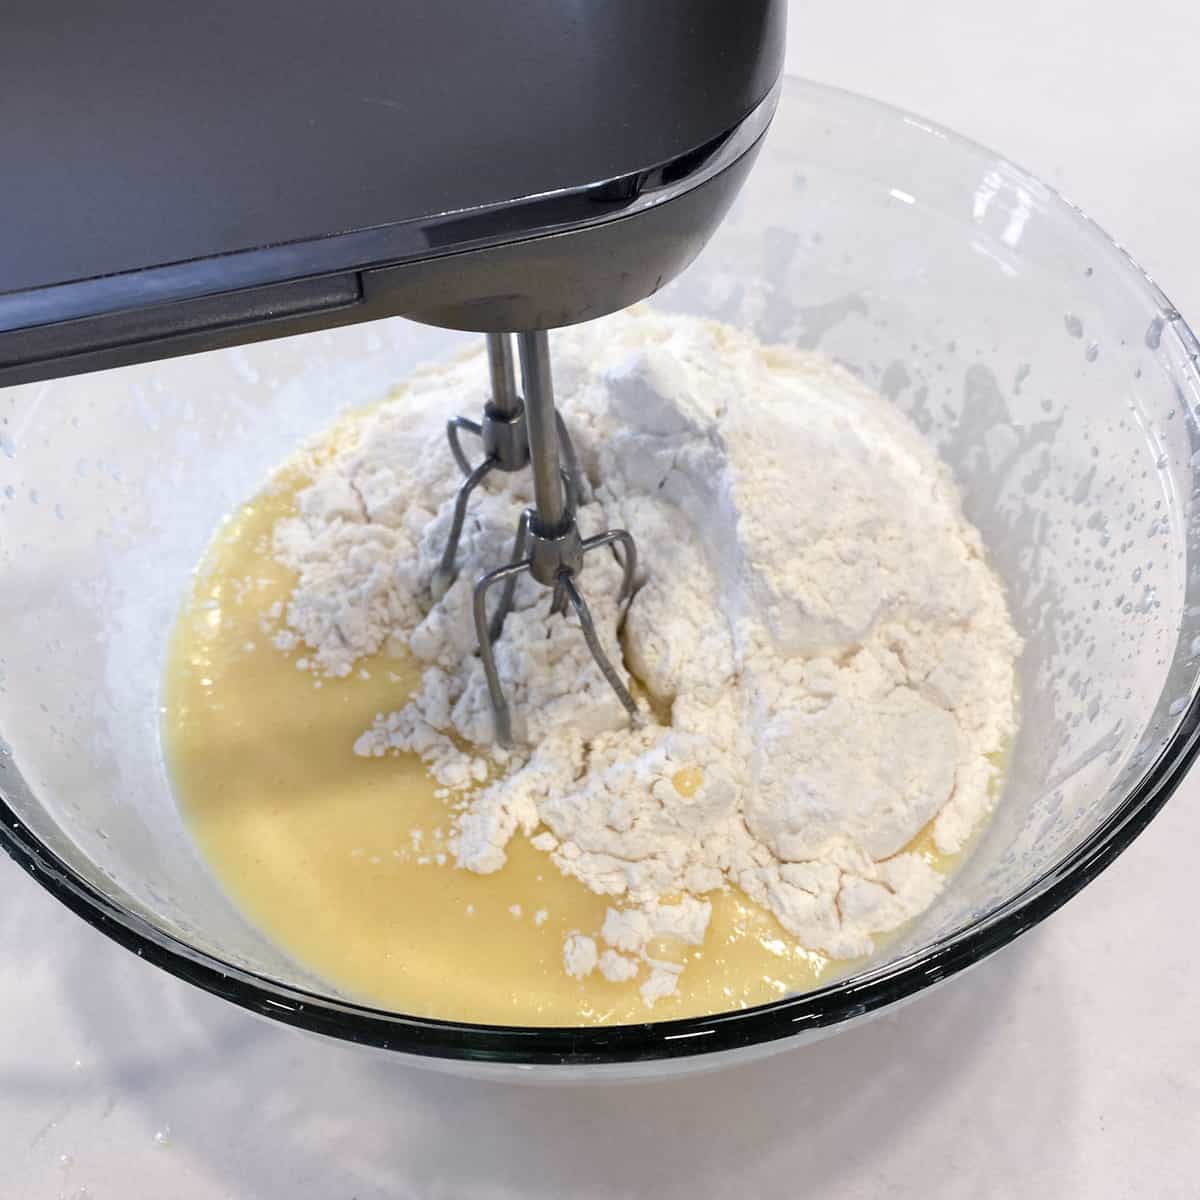 Beating the flour into the wet ingredients with an electric mixer.